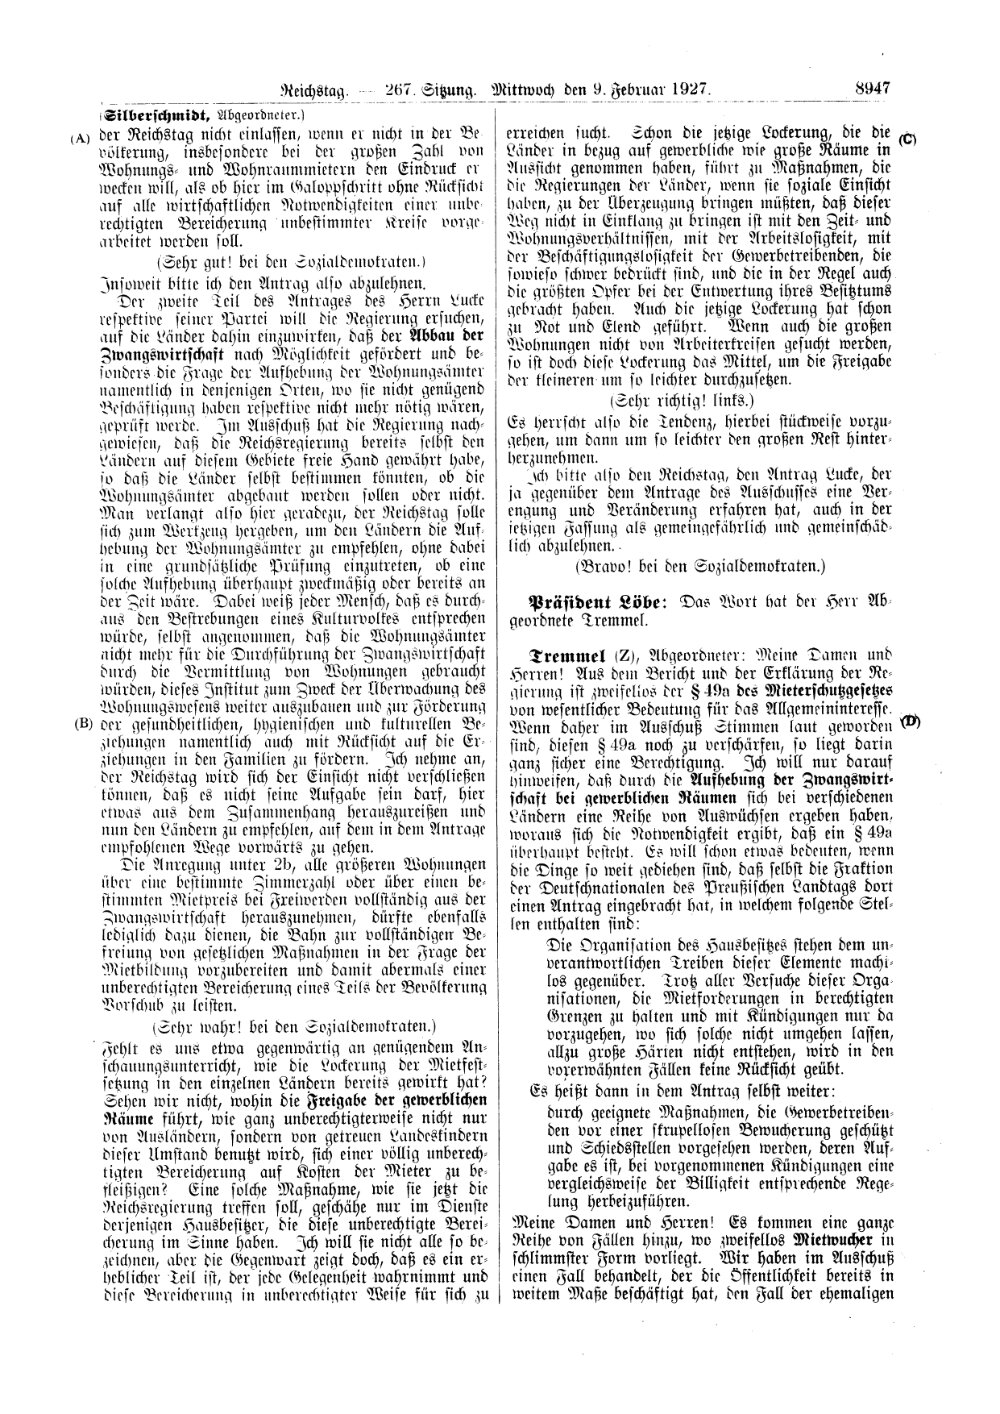 Scan of page 8947